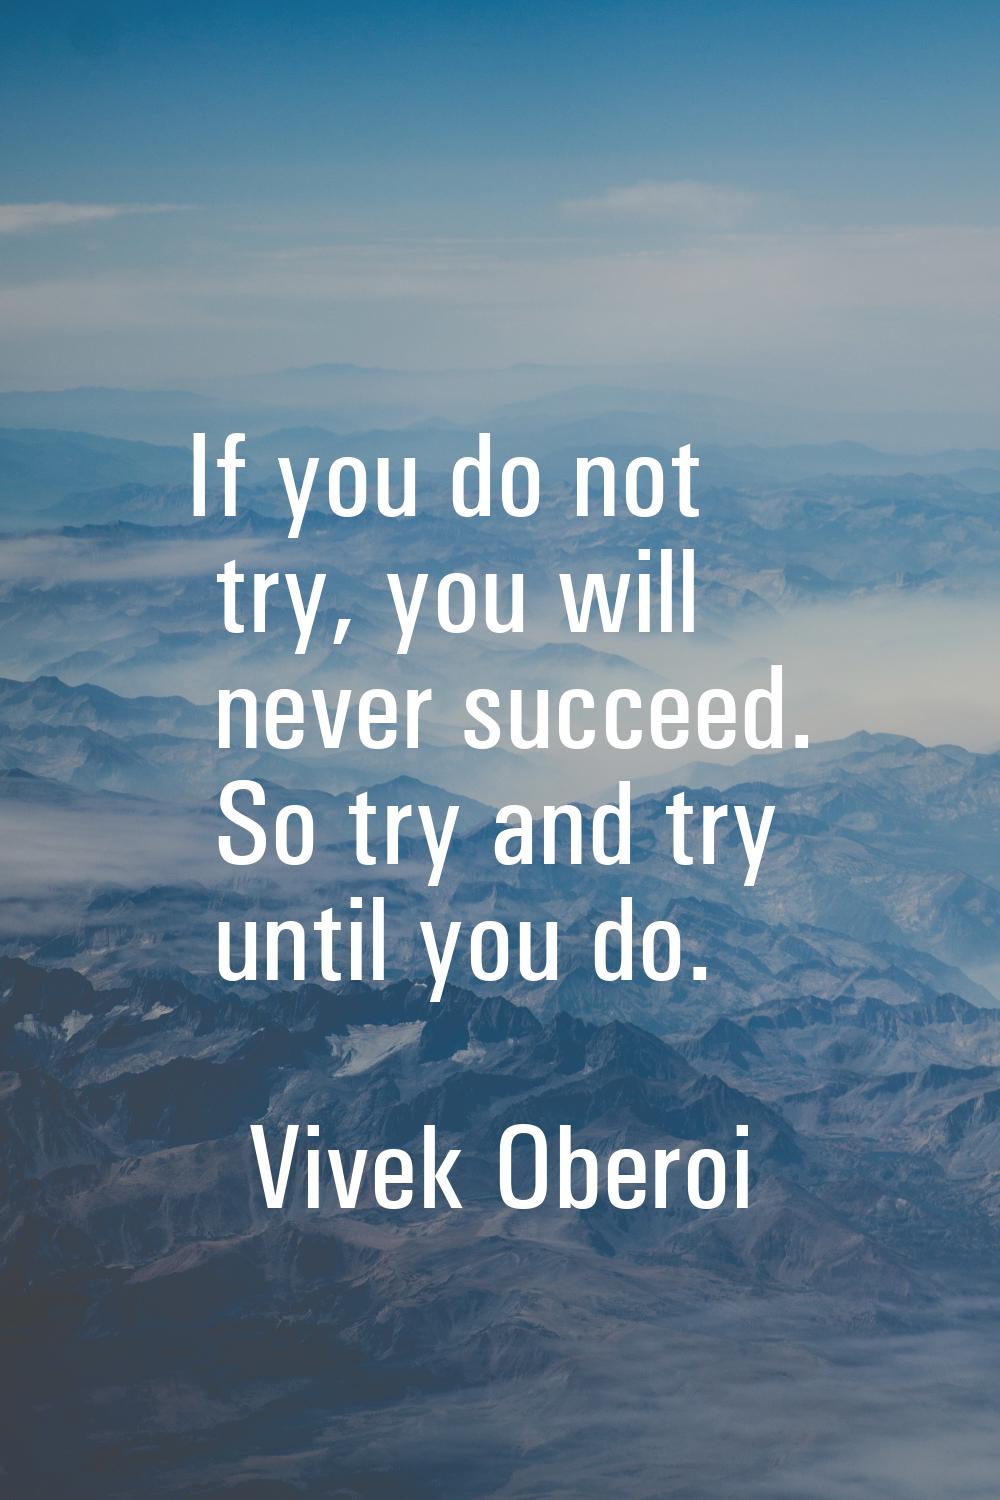 If you do not try, you will never succeed. So try and try until you do.